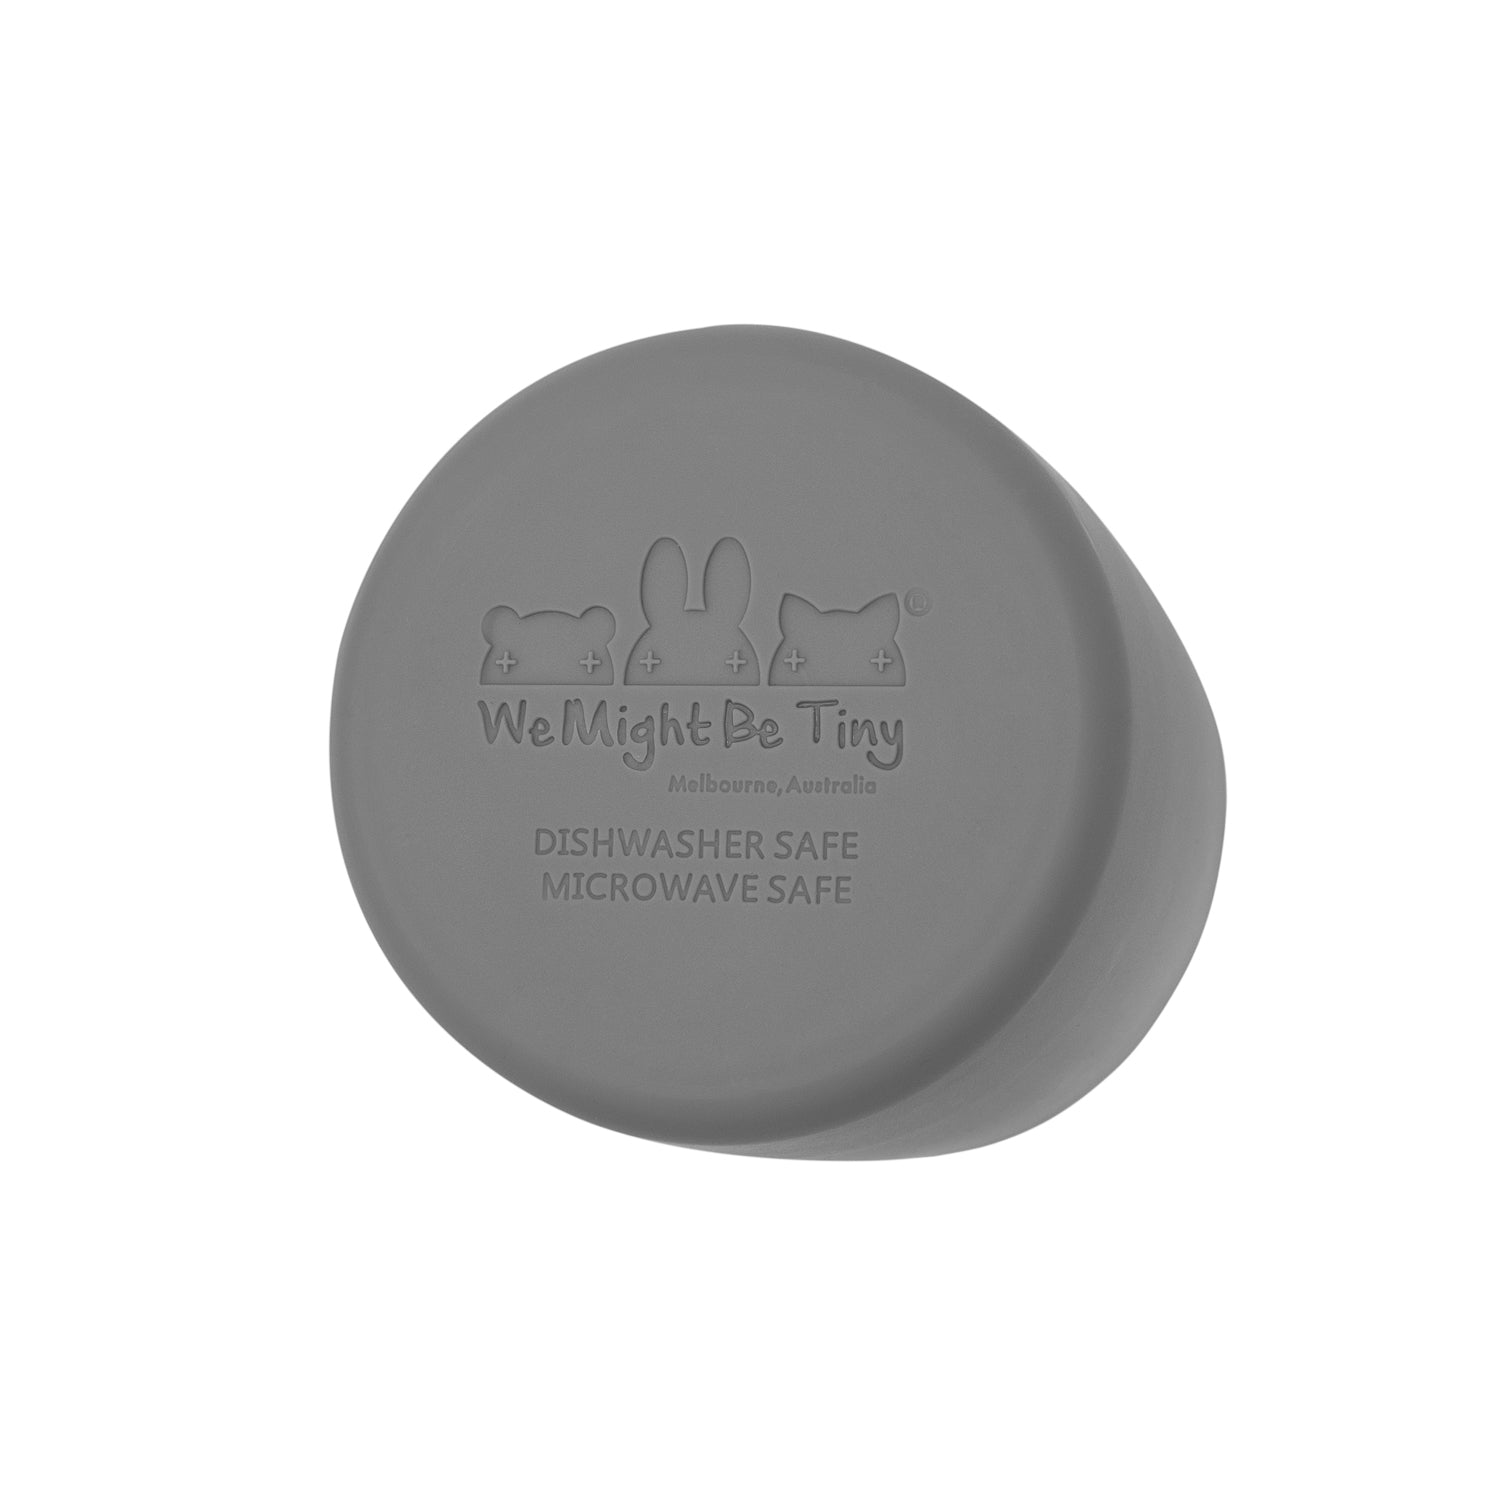 Bottom of grey silicone cup